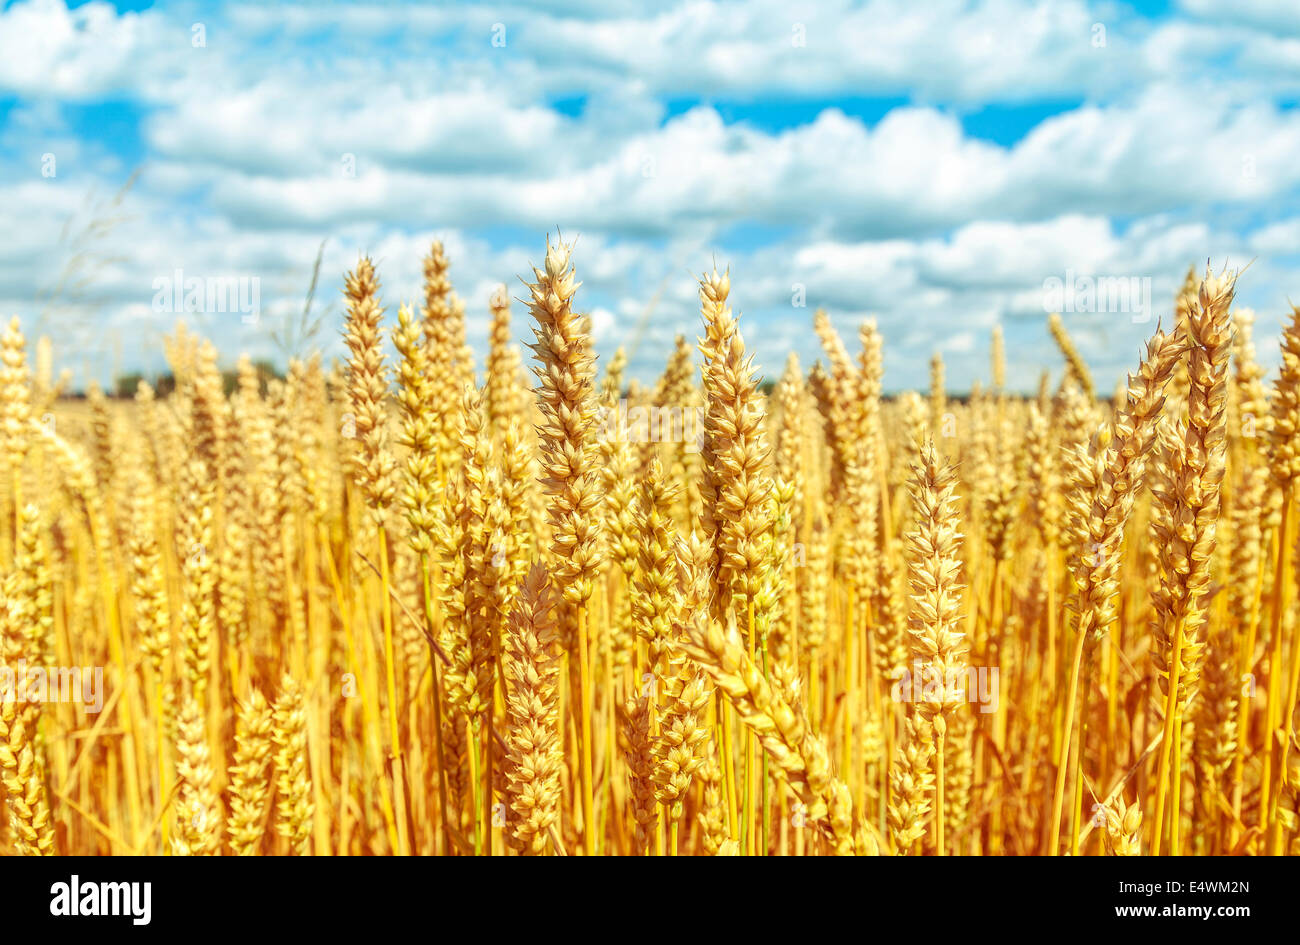 Golden wheat field with blue sky and clouds in background. Stock Photo